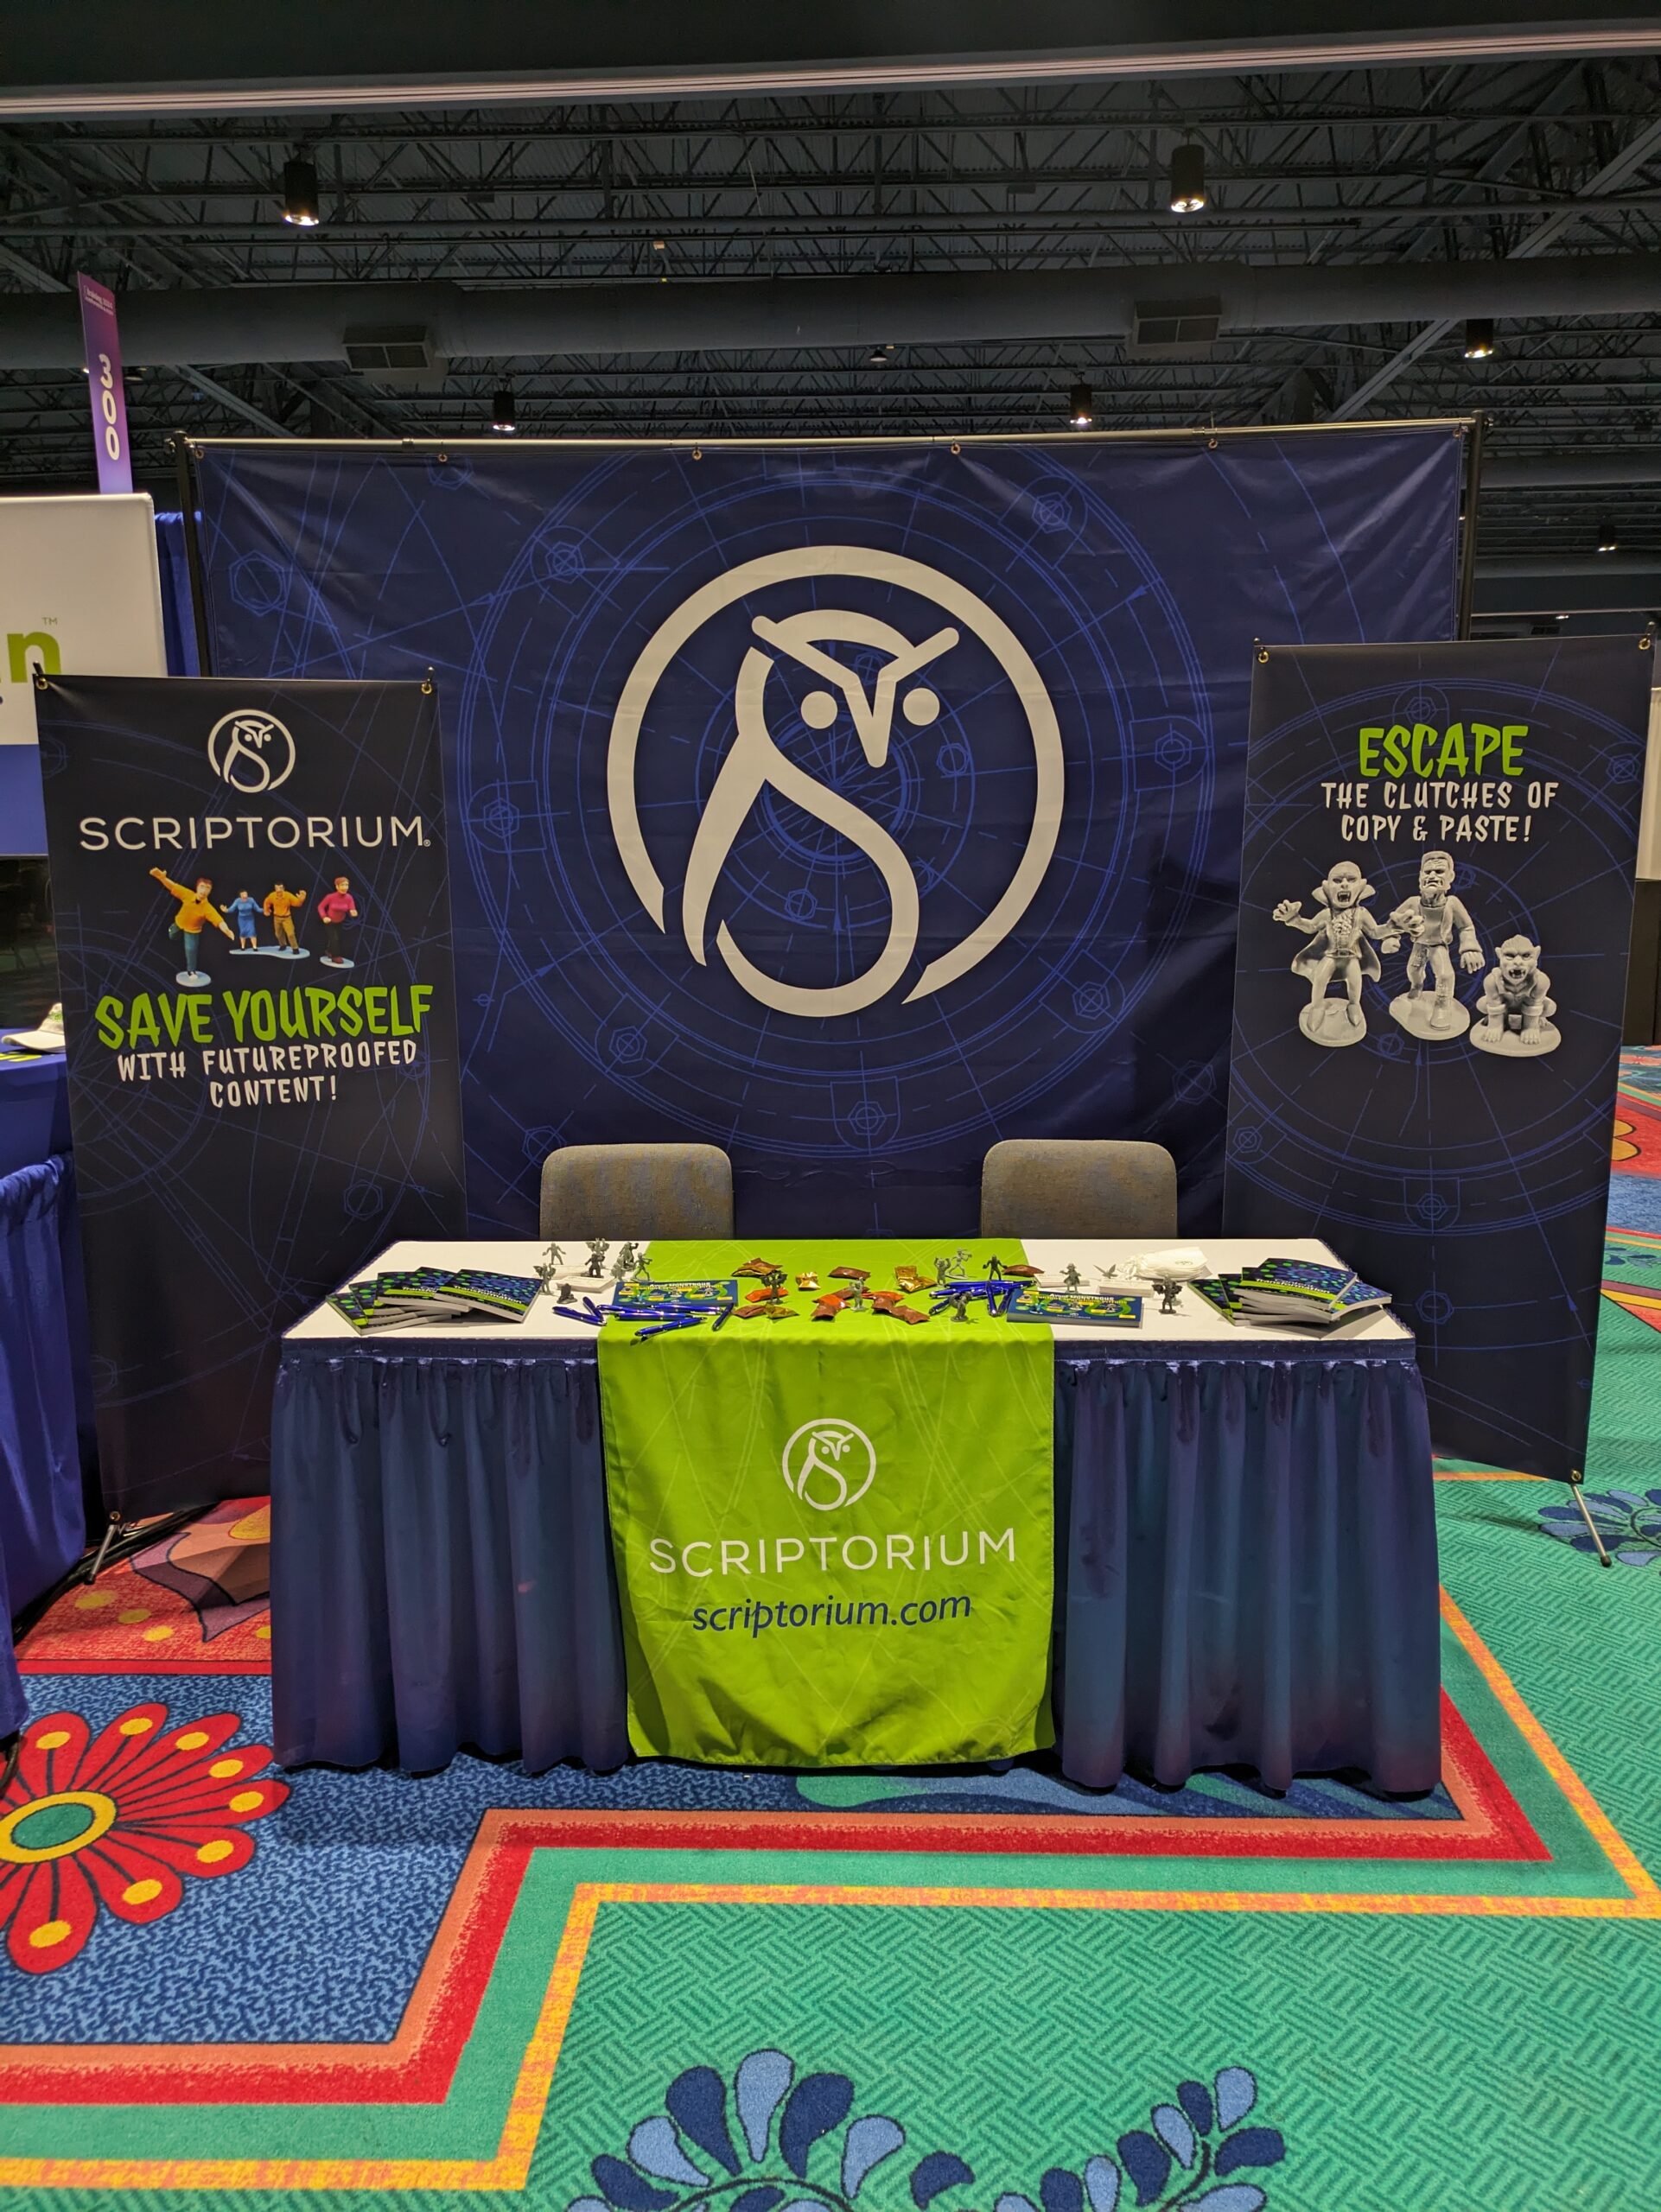 Picture of large booth set up at a conference expo floor with a blue background and and owl icon, blue banners, and a blue and white table with a bright green tablecloth.